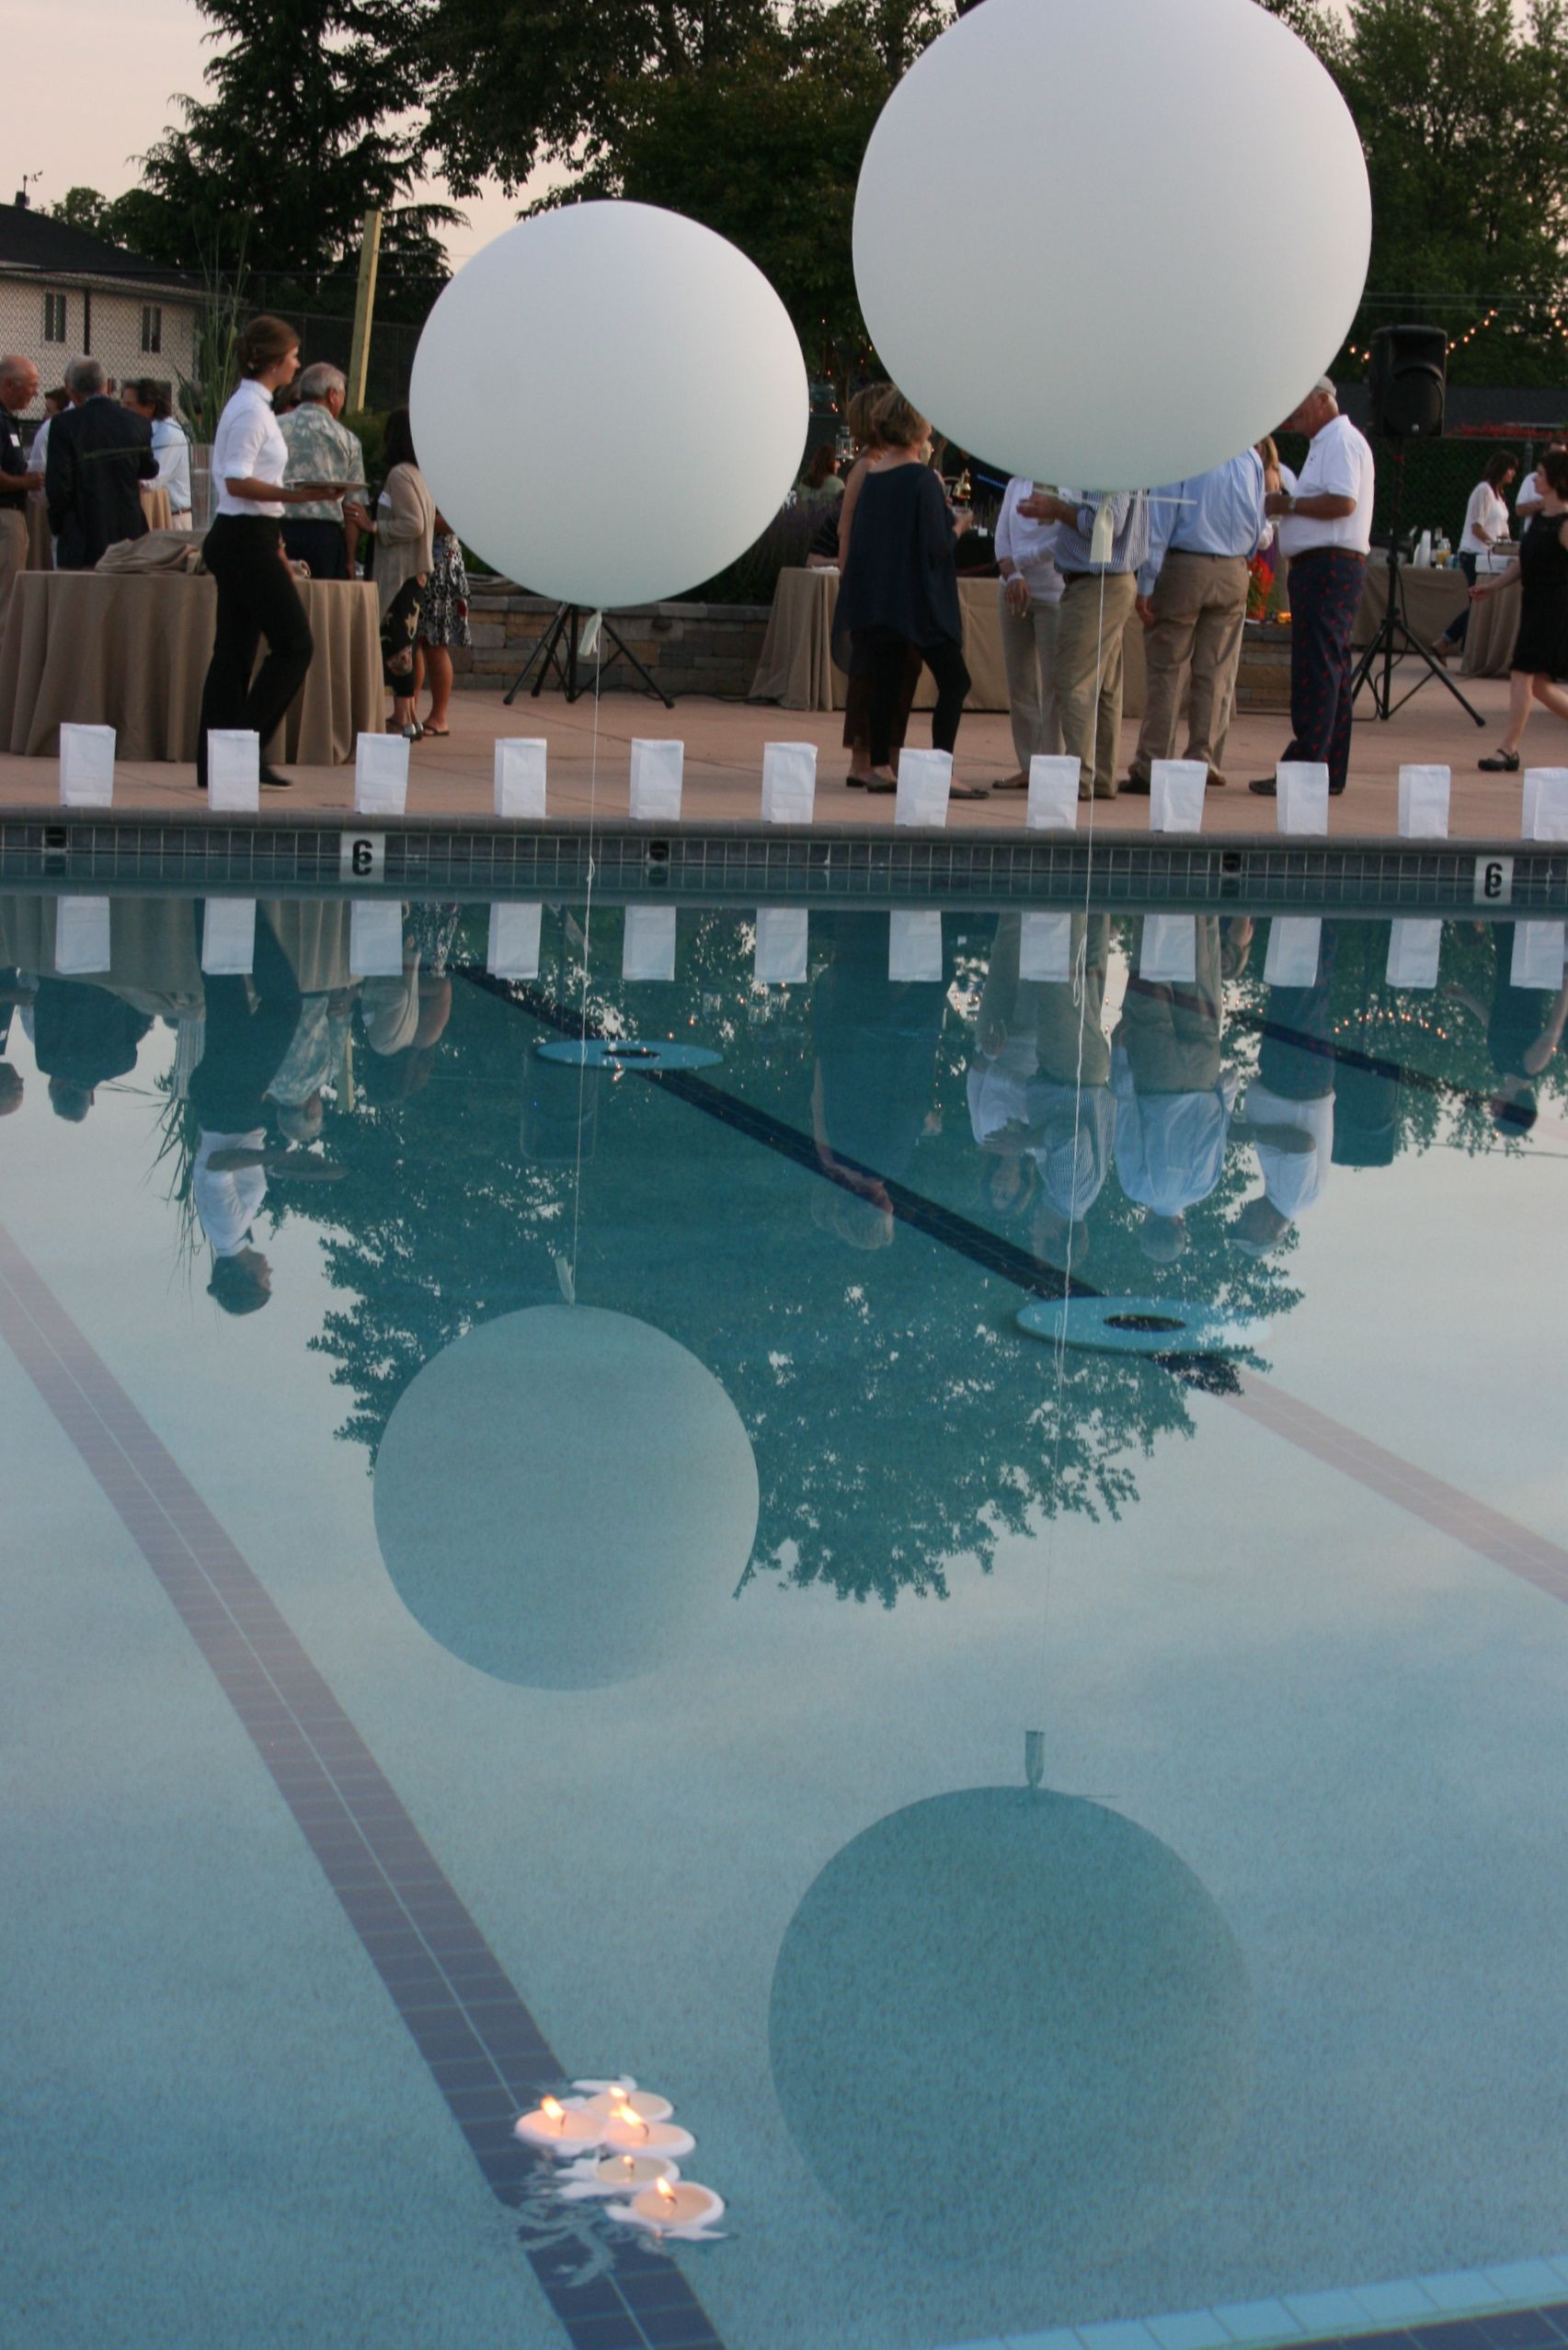 Elegant Pool Party Ideas
 large balloon with weighted ends in pool